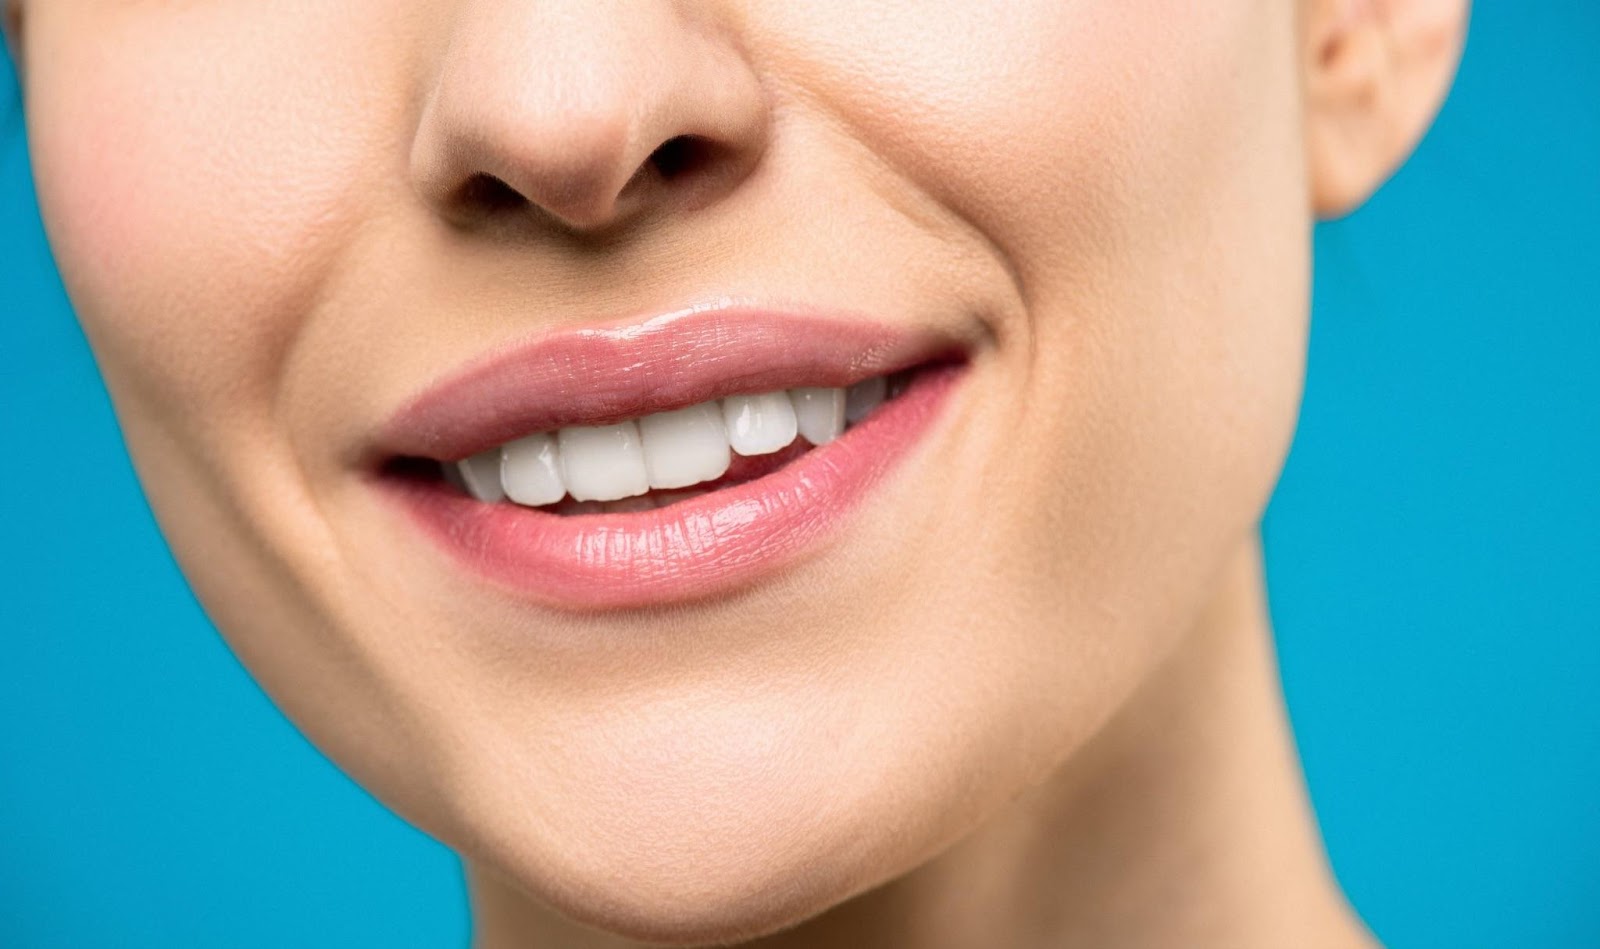 What Makes Crooked Teeth a Health Risk?